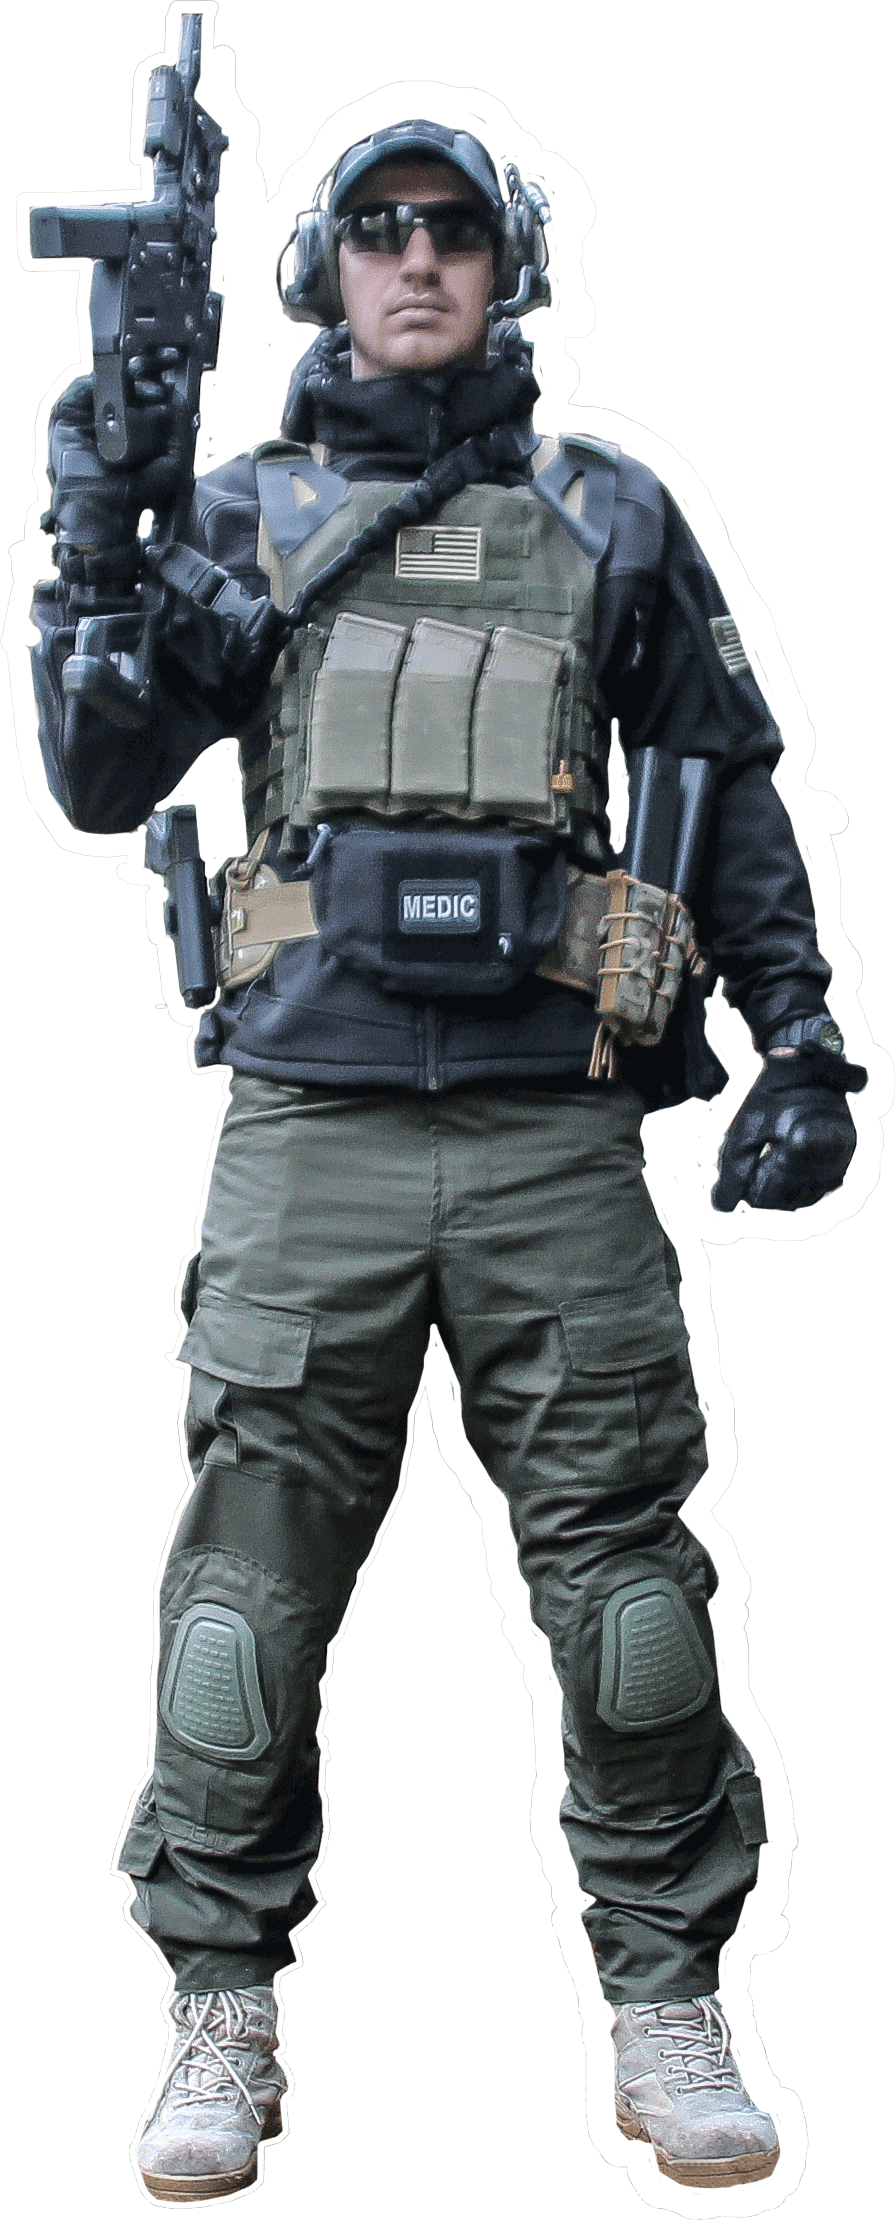 T-rex heritage airsoft olive noir outfit tenue us flag arms